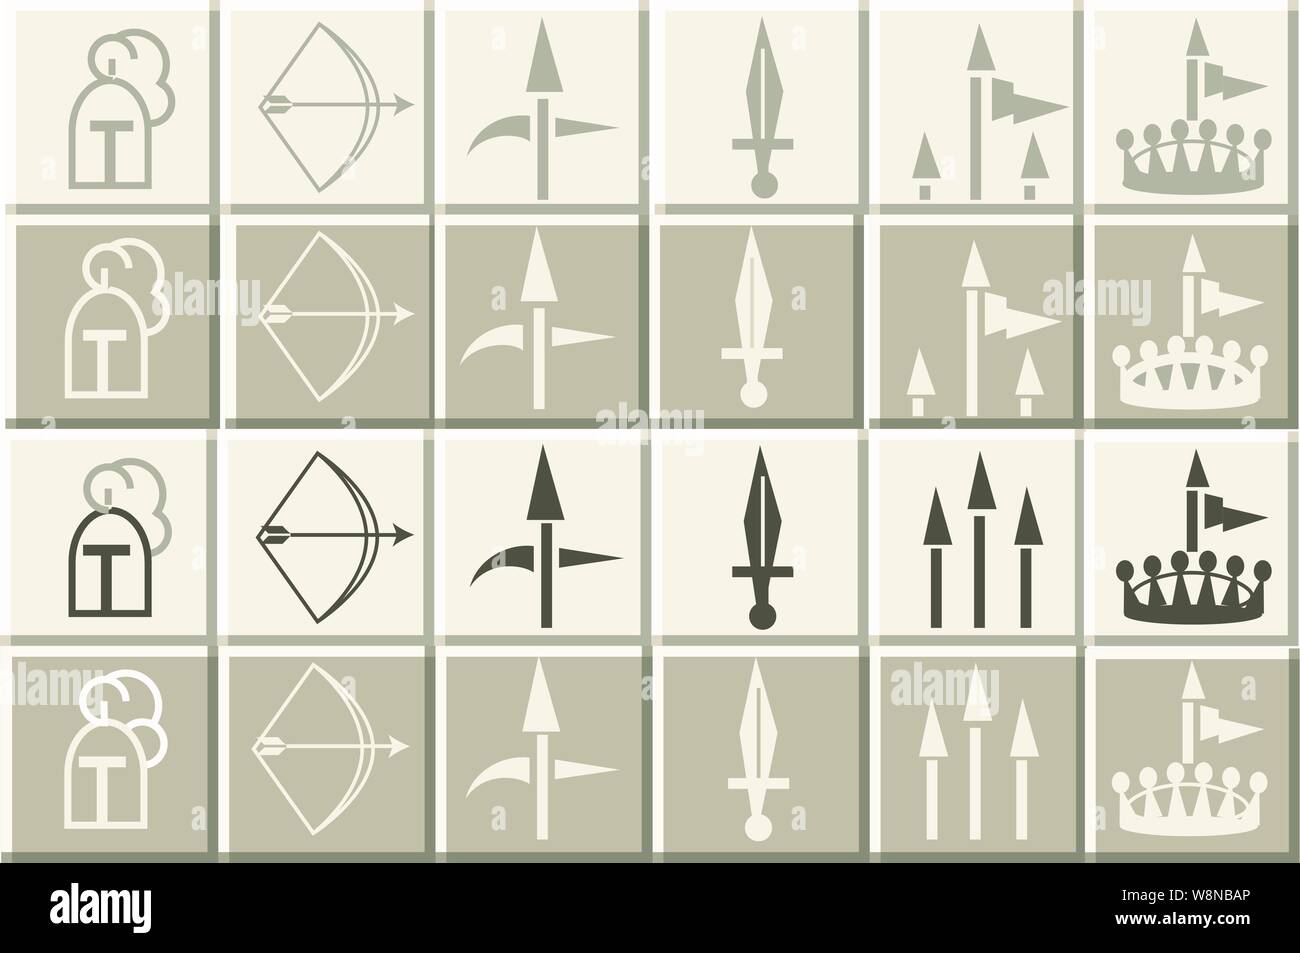 Medievil icons, tile or game  squares with helmets bow & arrow pike spear flag standard & crowns Stock Vector